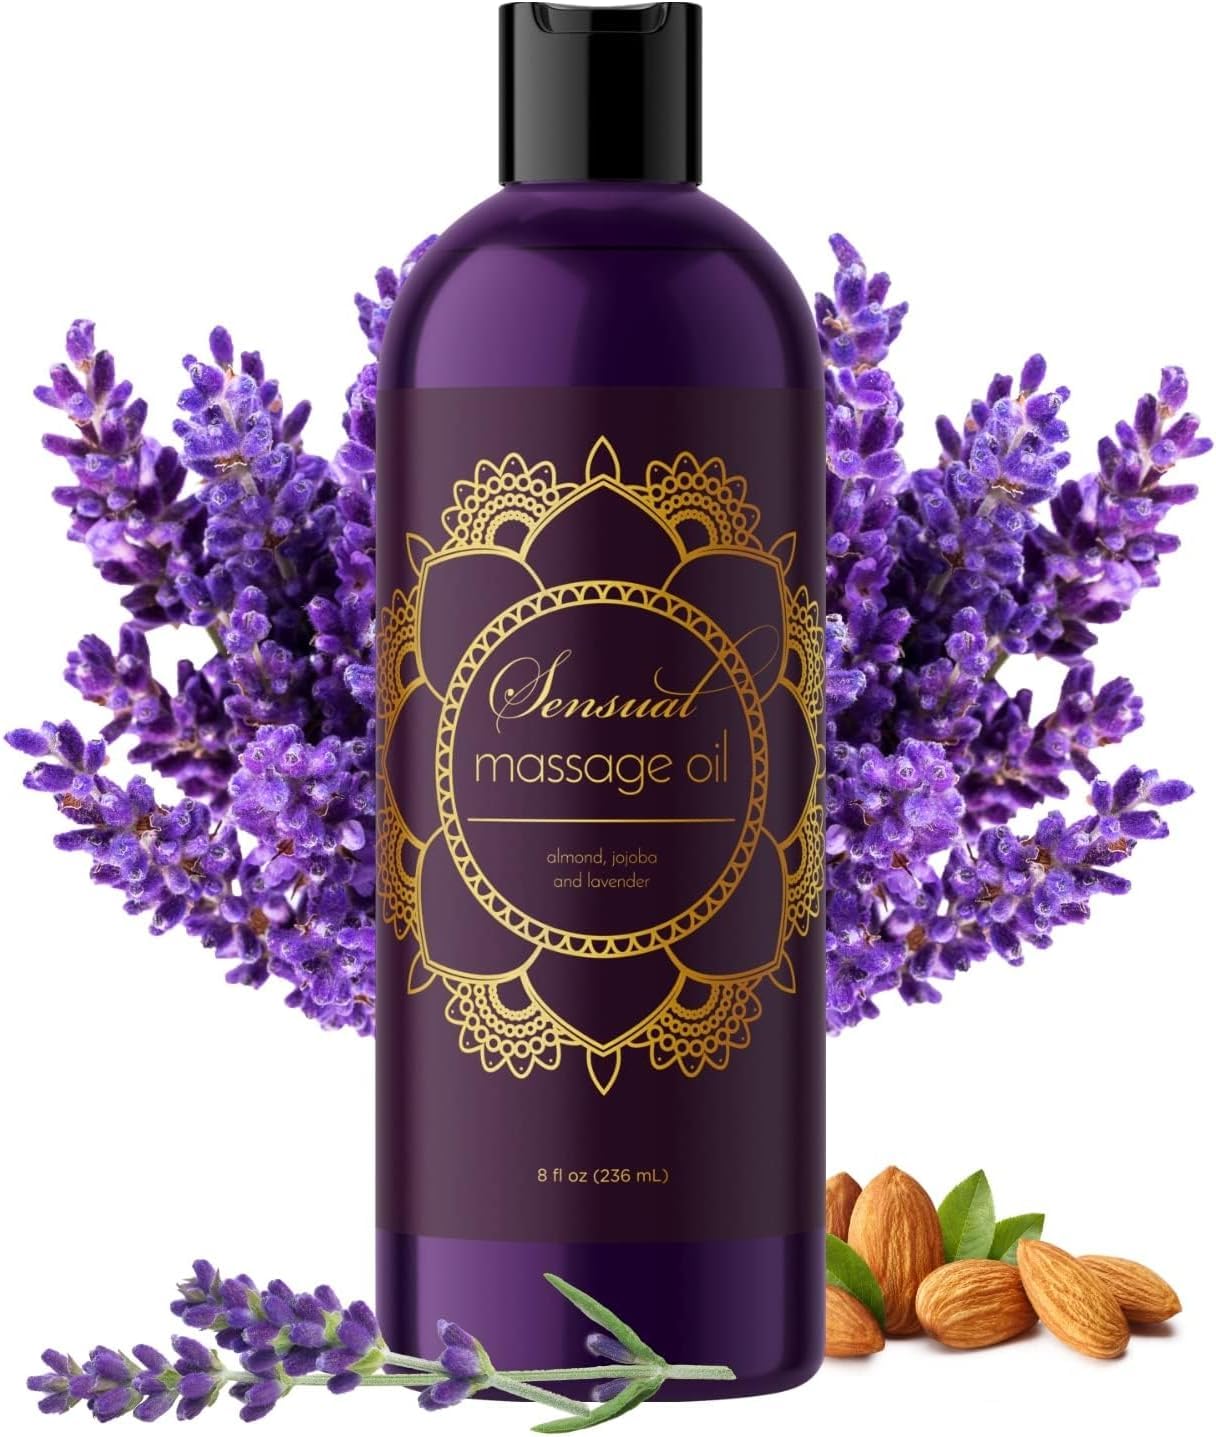 Aromatherapy Sensual Massage Oil for Couples - Relaxing Full Body Massage Oil